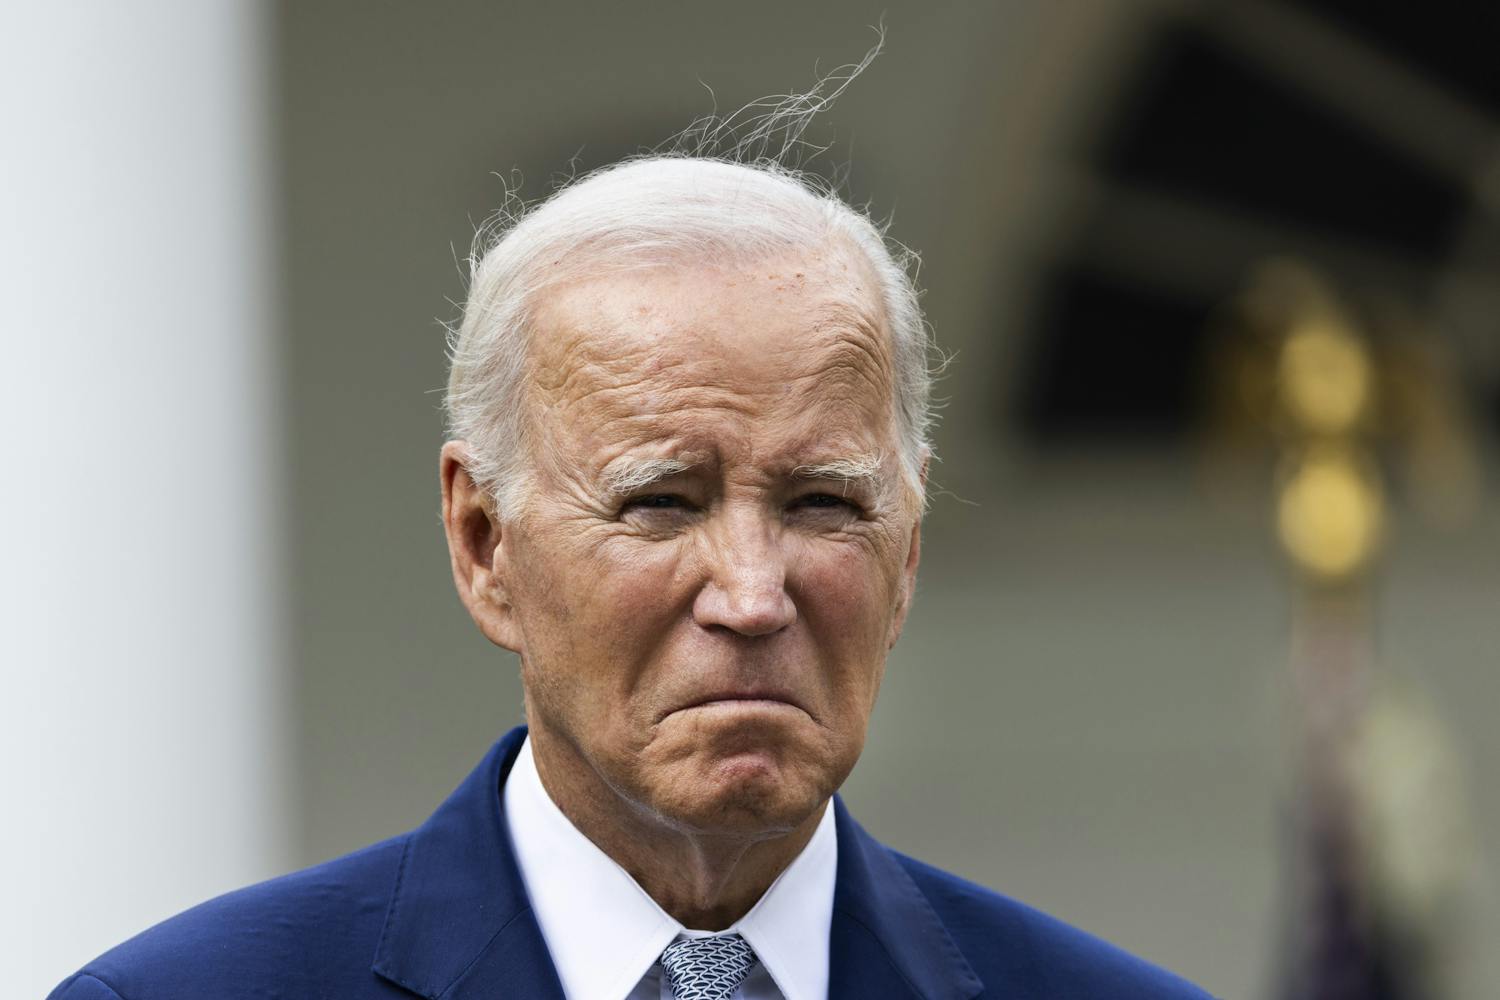 Americans worry about Joe Biden, ‘a tired old man’